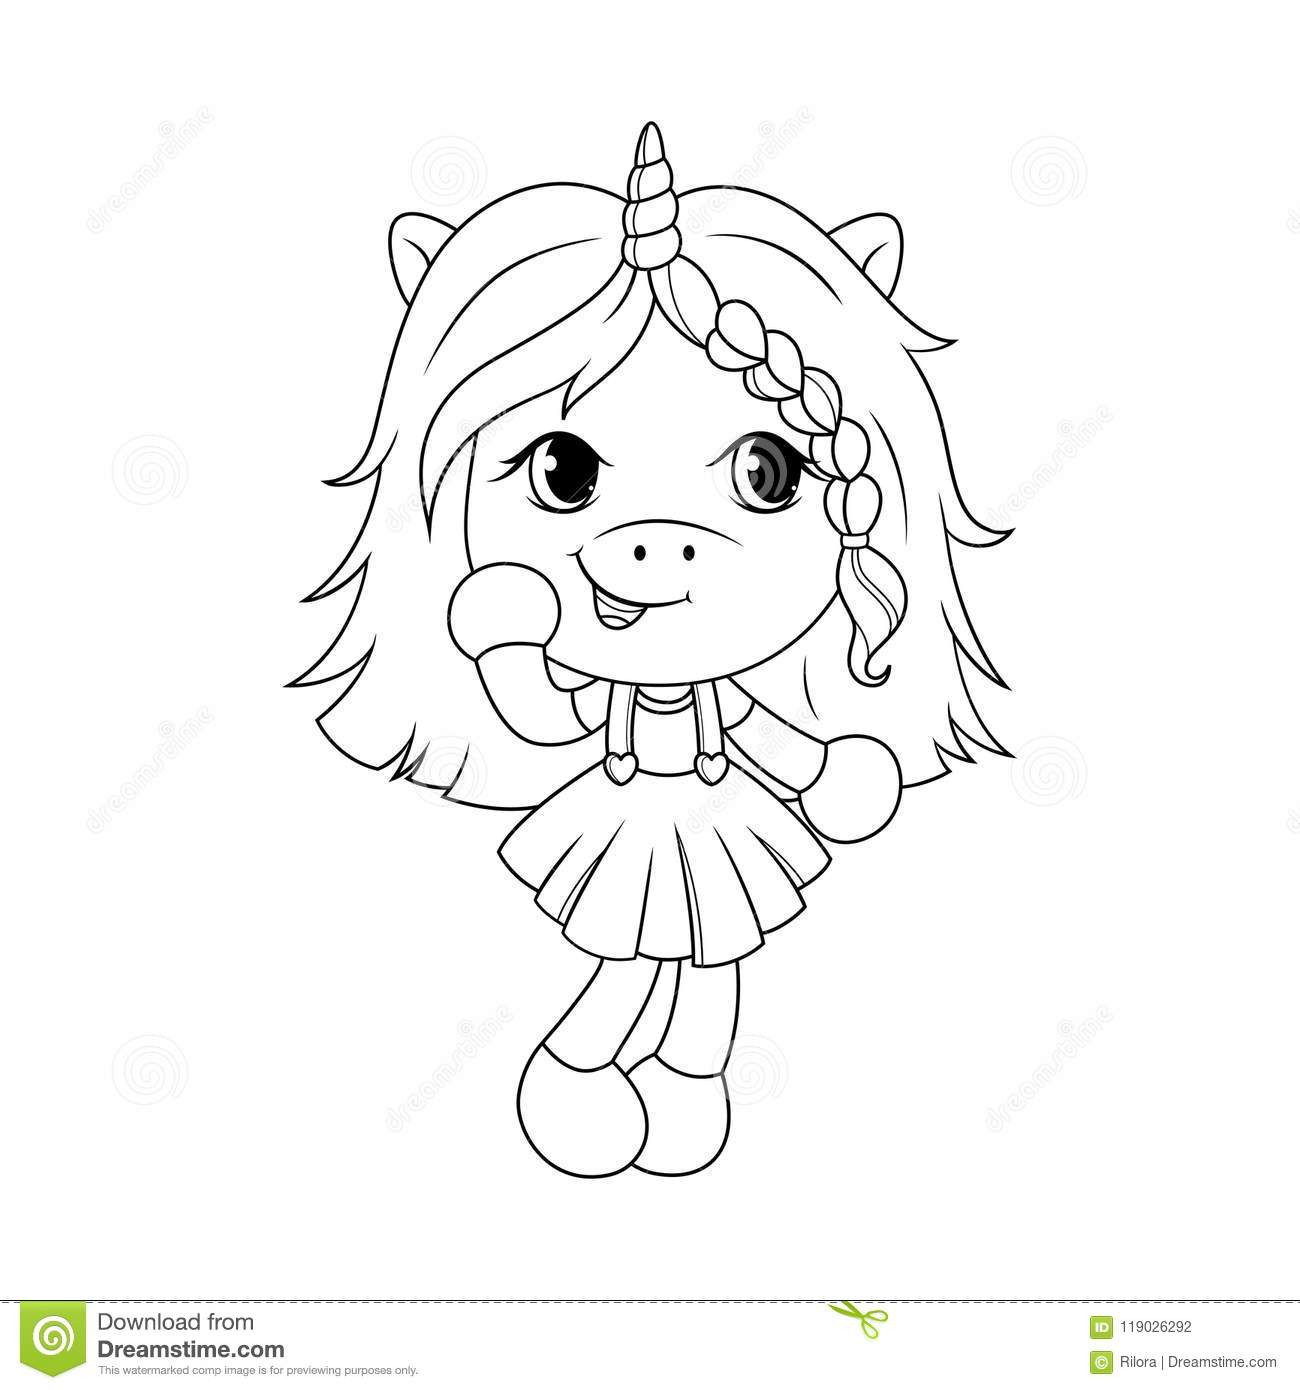 Coloring Pages Of Cute Baby Unicorns
 Cute Baby Unicorn Coloring Page For Girls Vector Stock